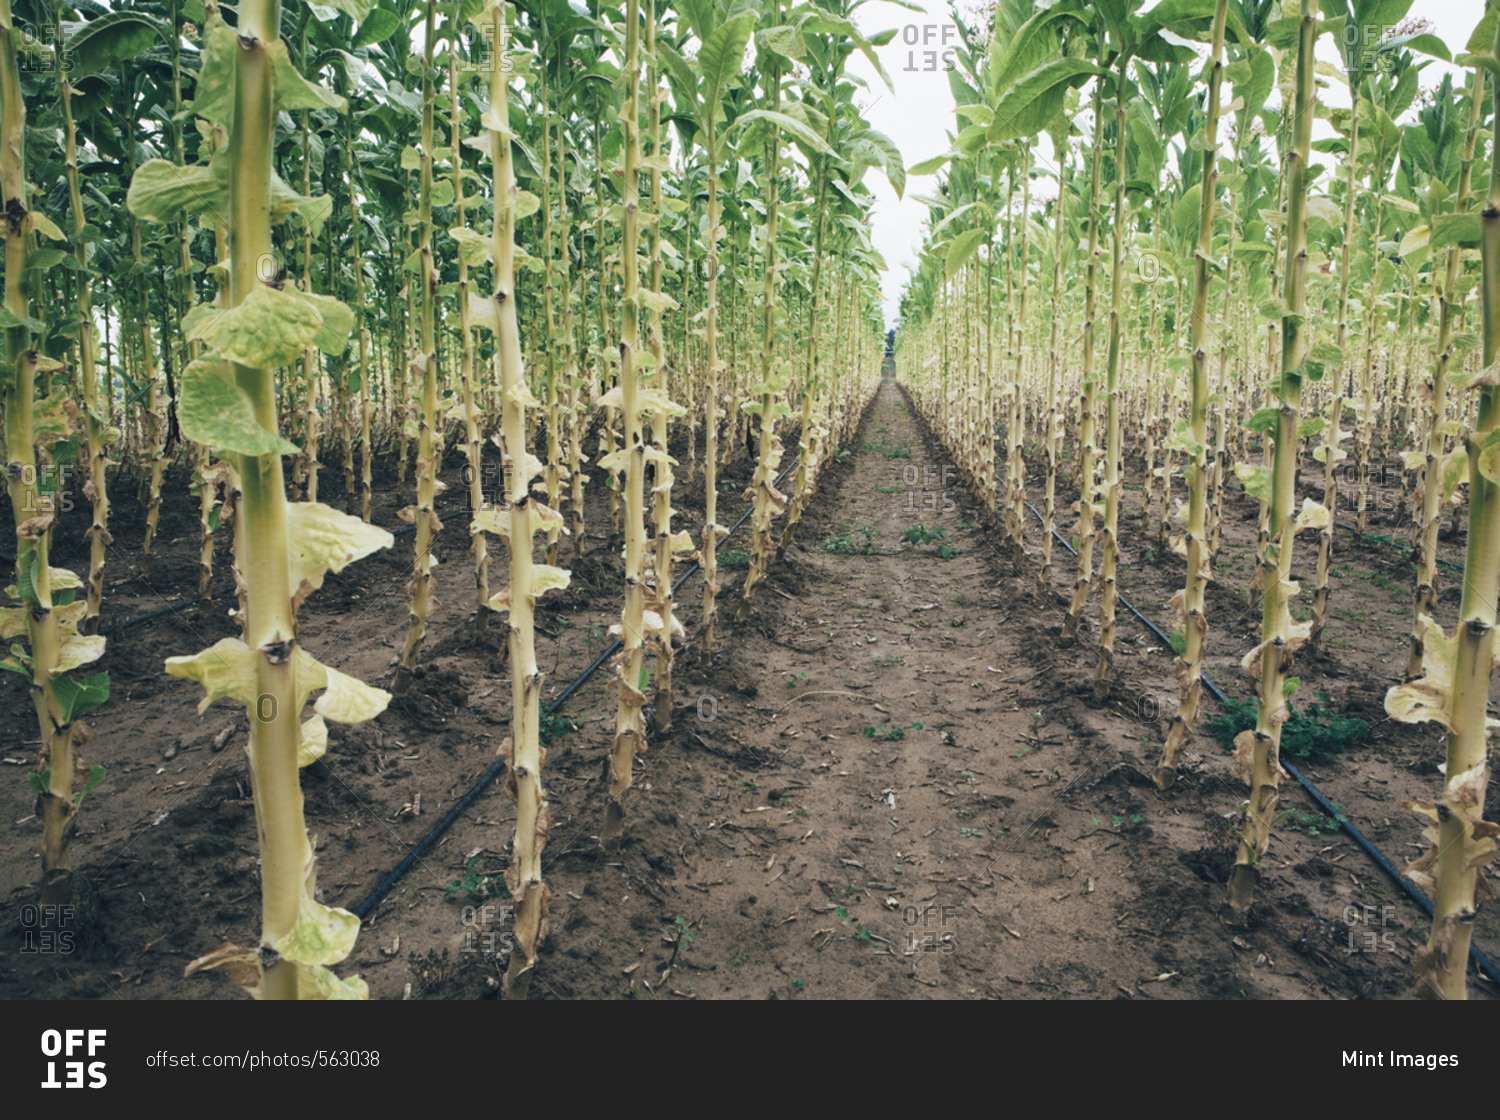 Field tobacco planted in straight rows growing in the fields around Cortona. Watering system, hose pipes on the soil.